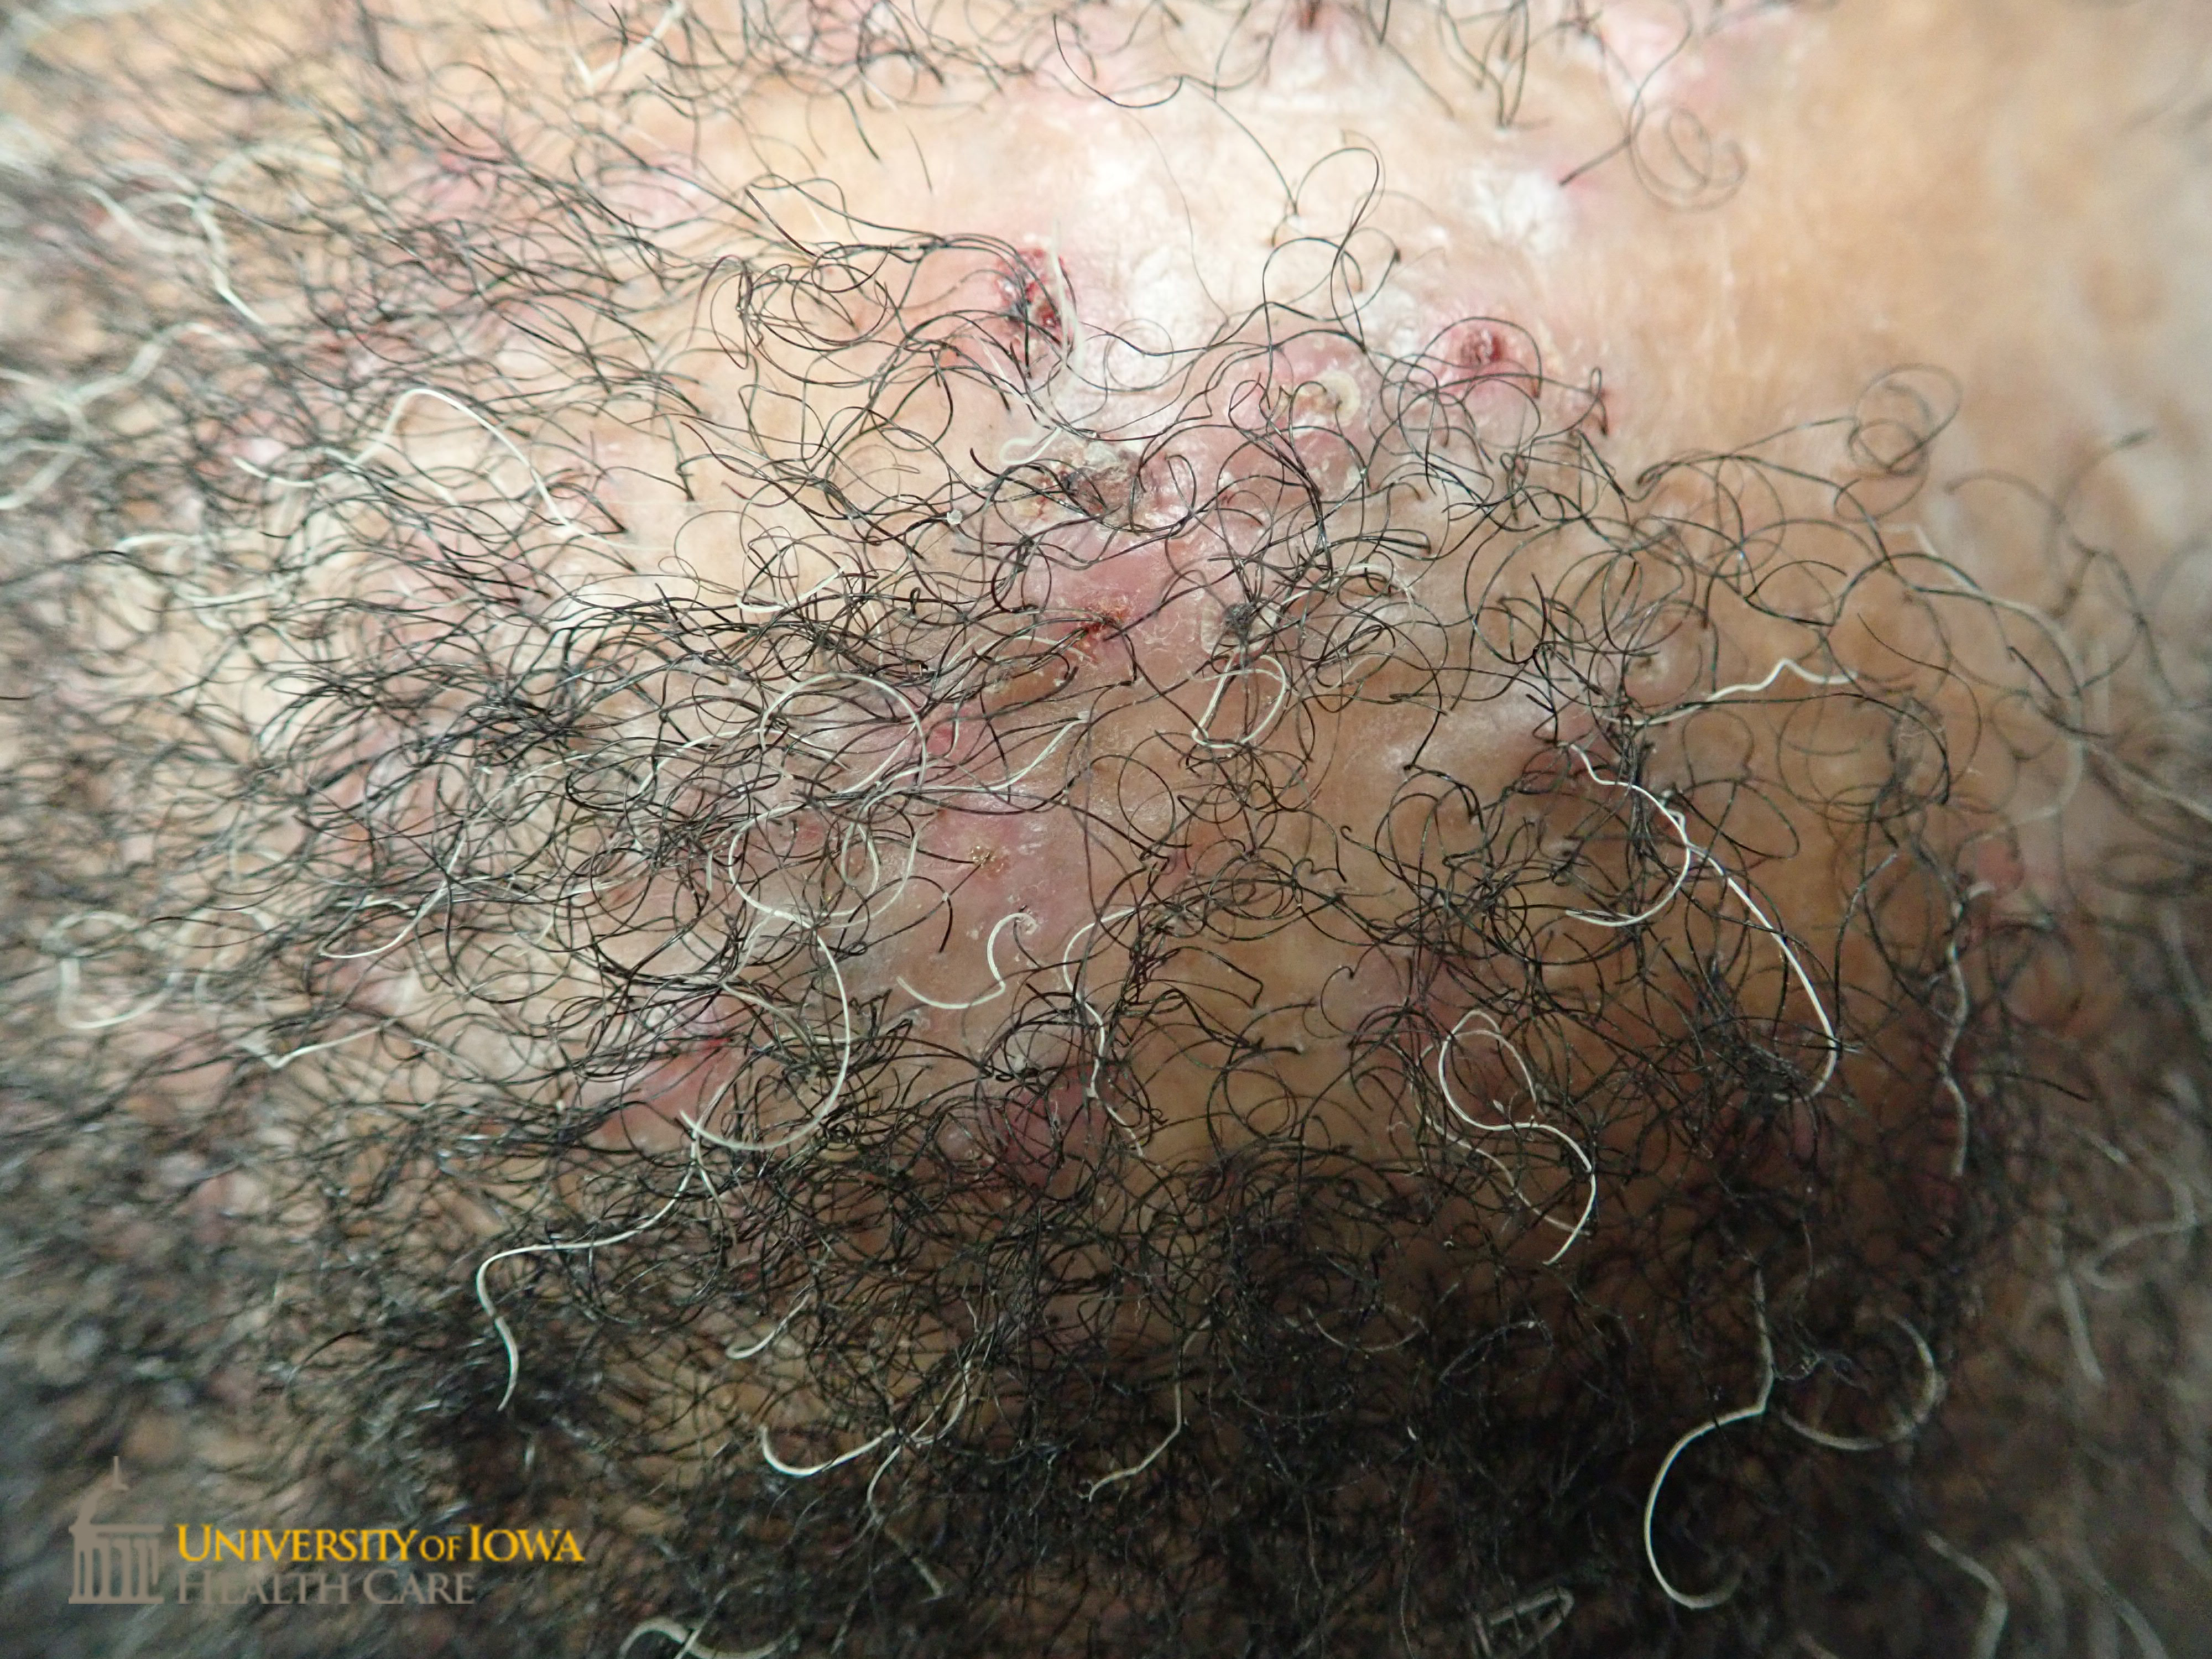 Follicularly based papules and pustules surrounded by a patch of scarring alopecia on the scalp . (click images for higher resolution).